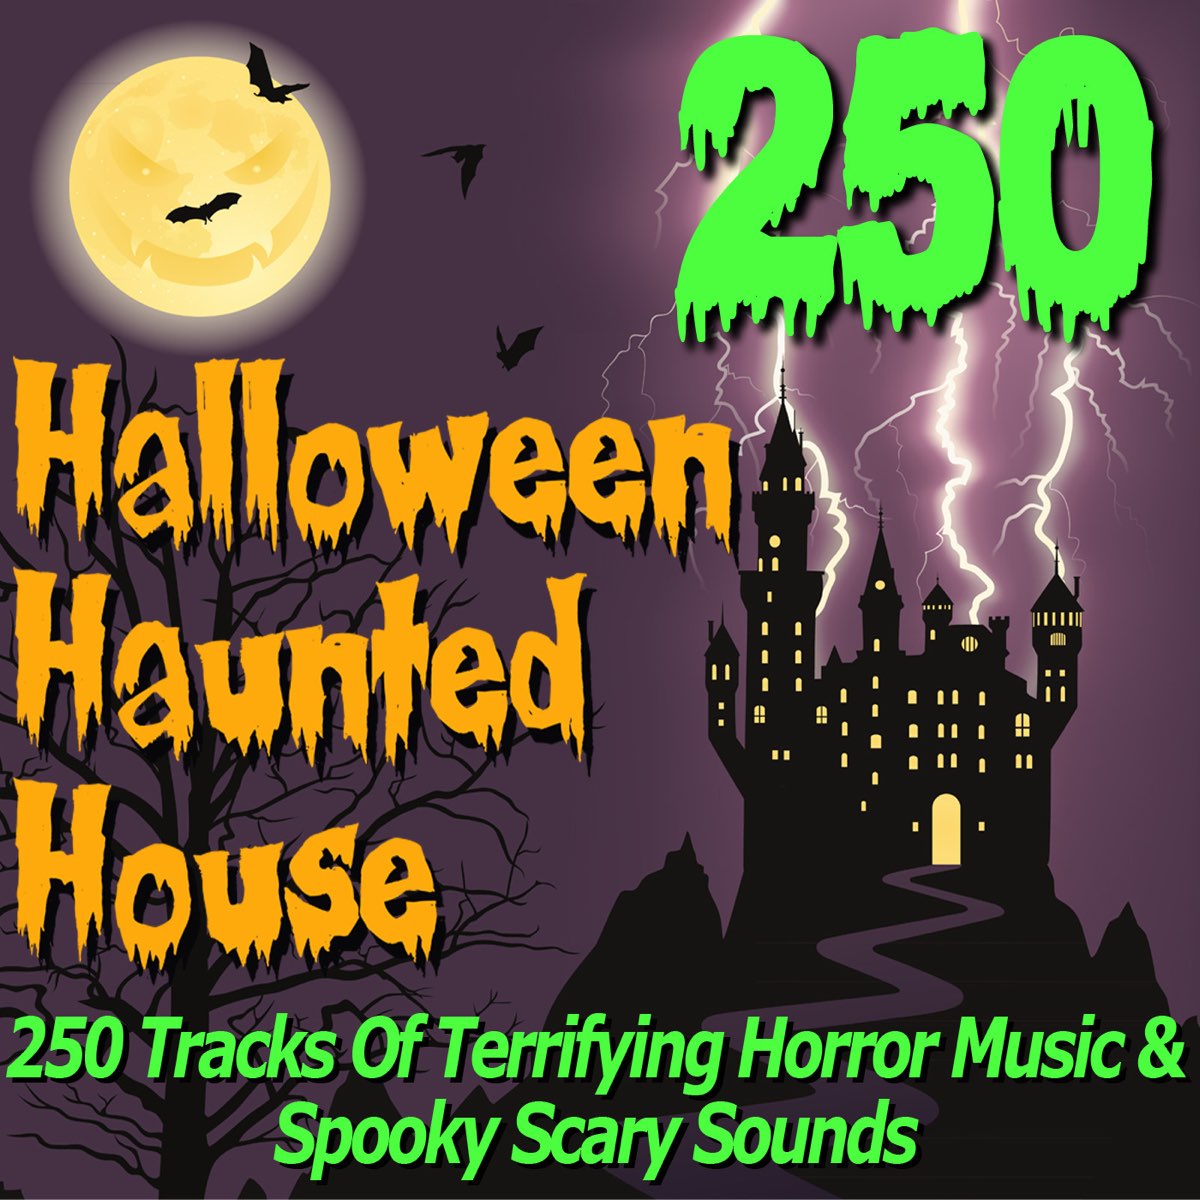 Halloween Haunted House CD - Over 70 Minutes Of Spooky Sounds